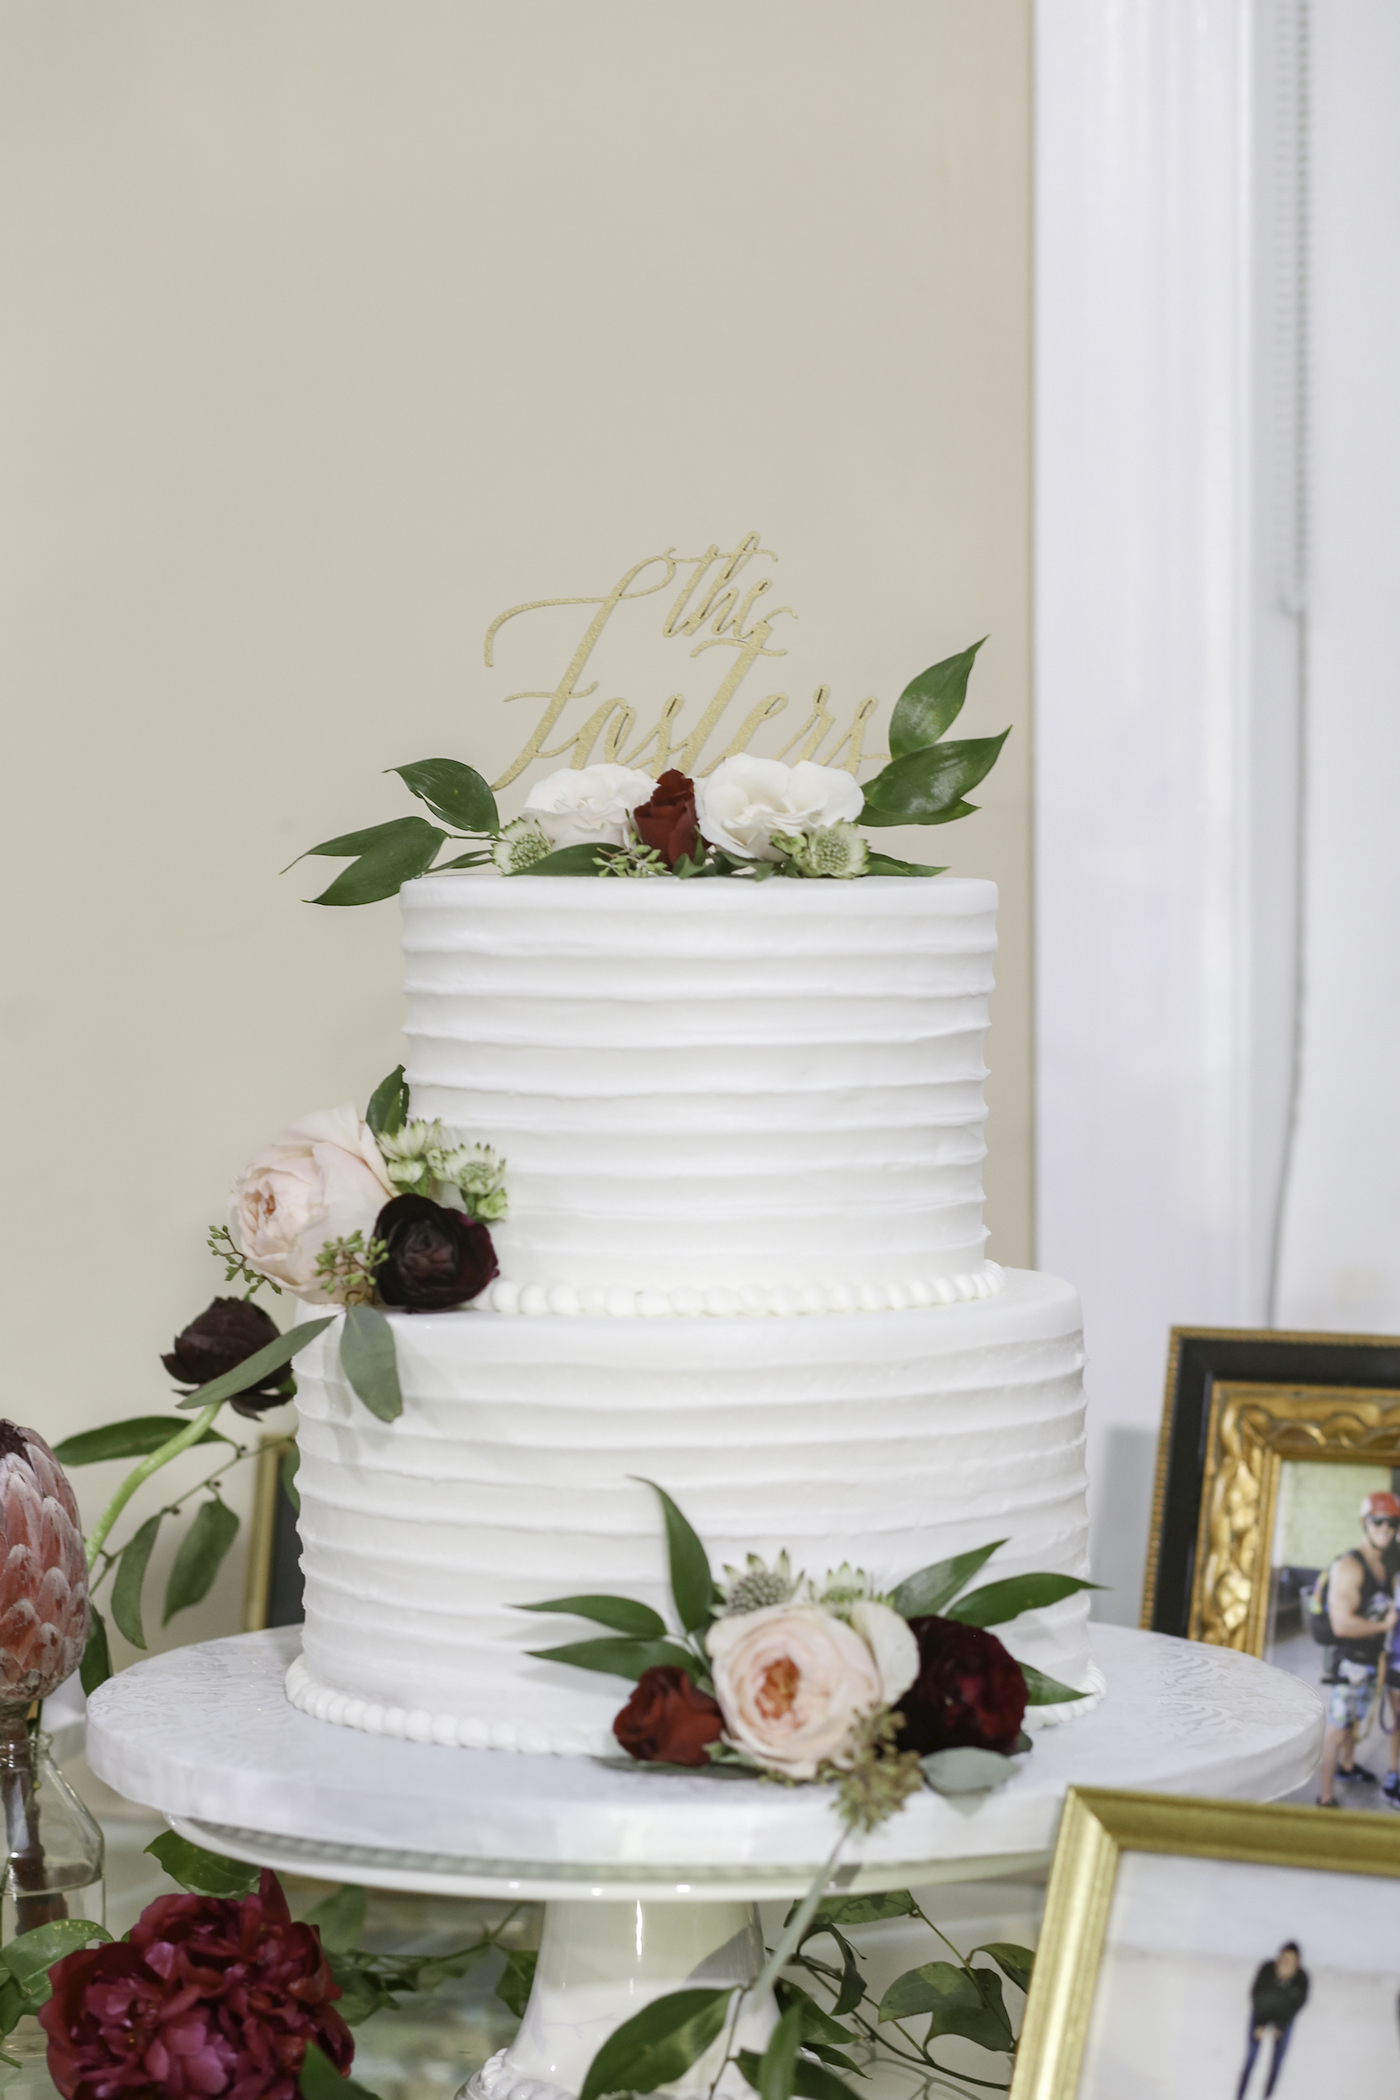 Simple Two Tier White Ruffle Textured Wedding Cake with Blush Pink and Red Roses and Greenery Leaves, Custom Gold Cake Topper | Wedding Photographer Lifelong Photography Studio | Tampa Bay Wedding Planner Blue Skies Weddings and Events | Tampa Wedding Bakery Wedding Cake Alessi Bakeries